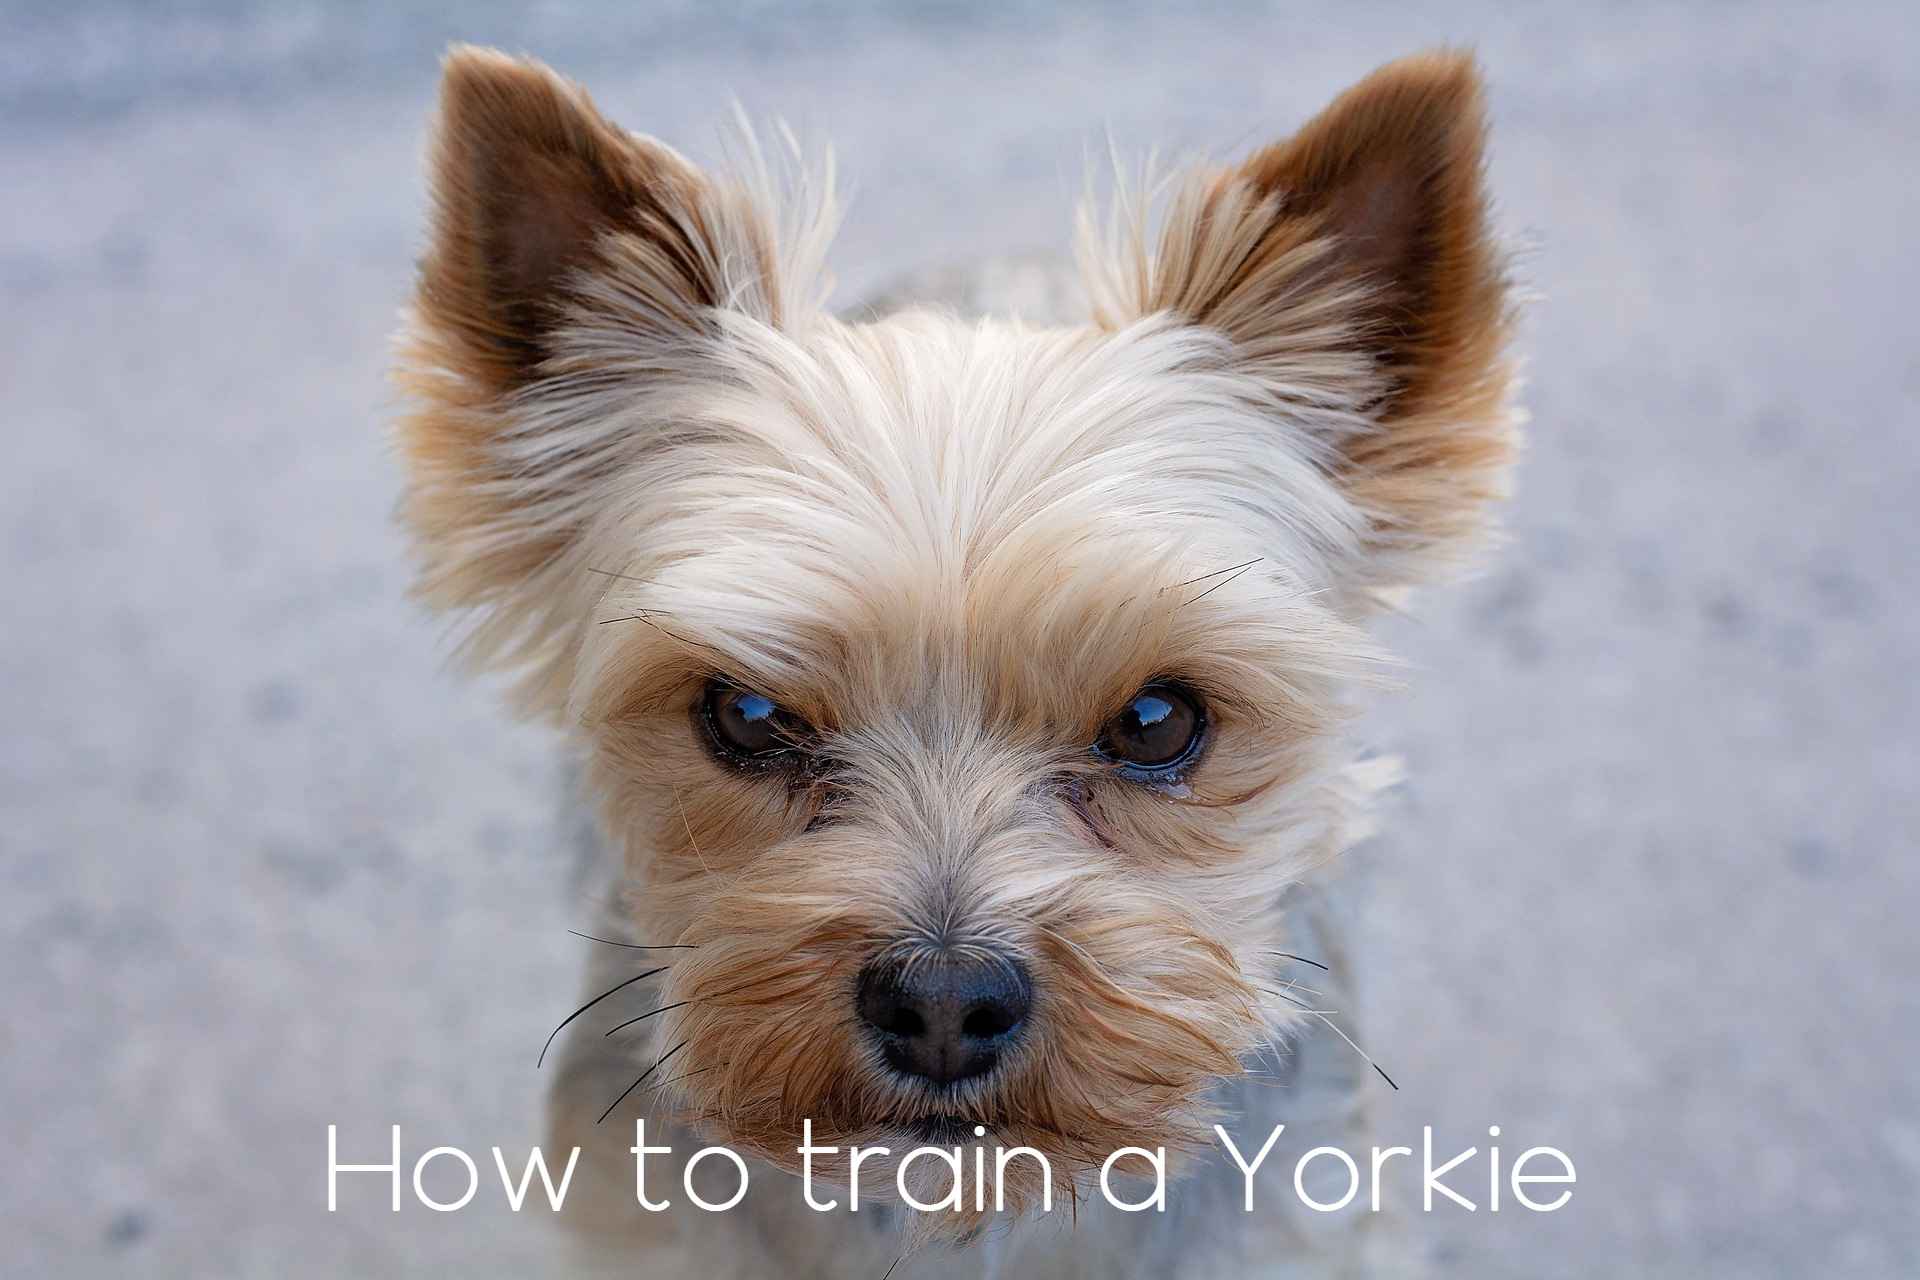 How to train a Yorkie